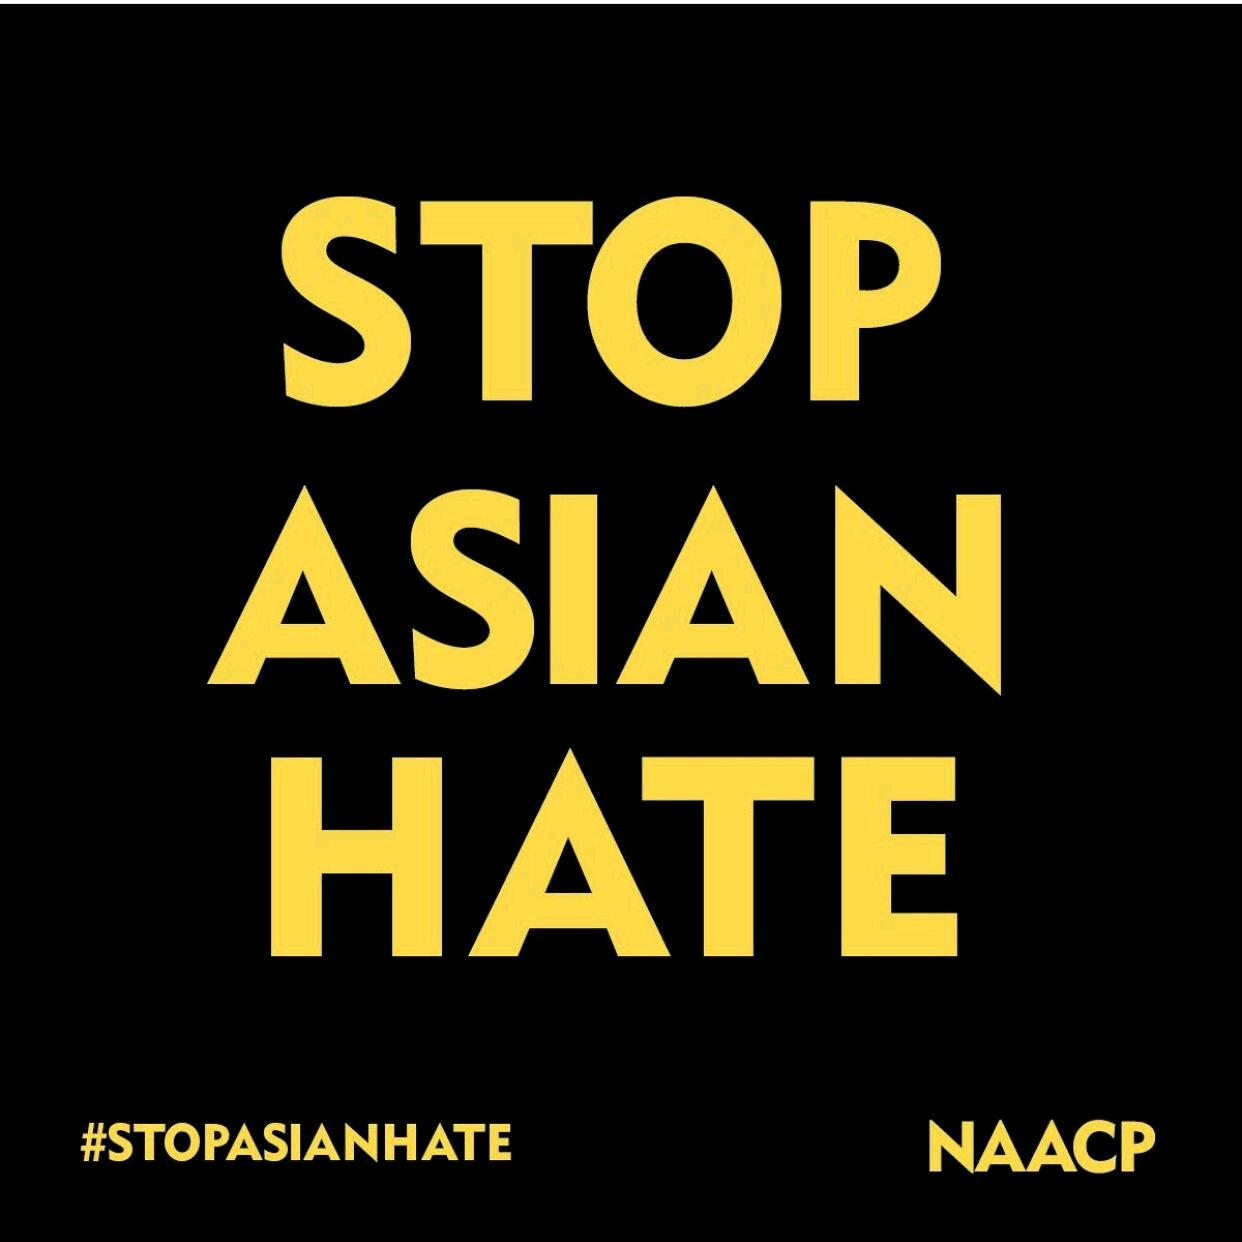 #StopAsianHate Stop #AAPI Hate 2021 find stop asian hate rally near me #losangeles #sanjose #sandiego #irvine #arcadia #unioncity #fremont #sanfrancisco 